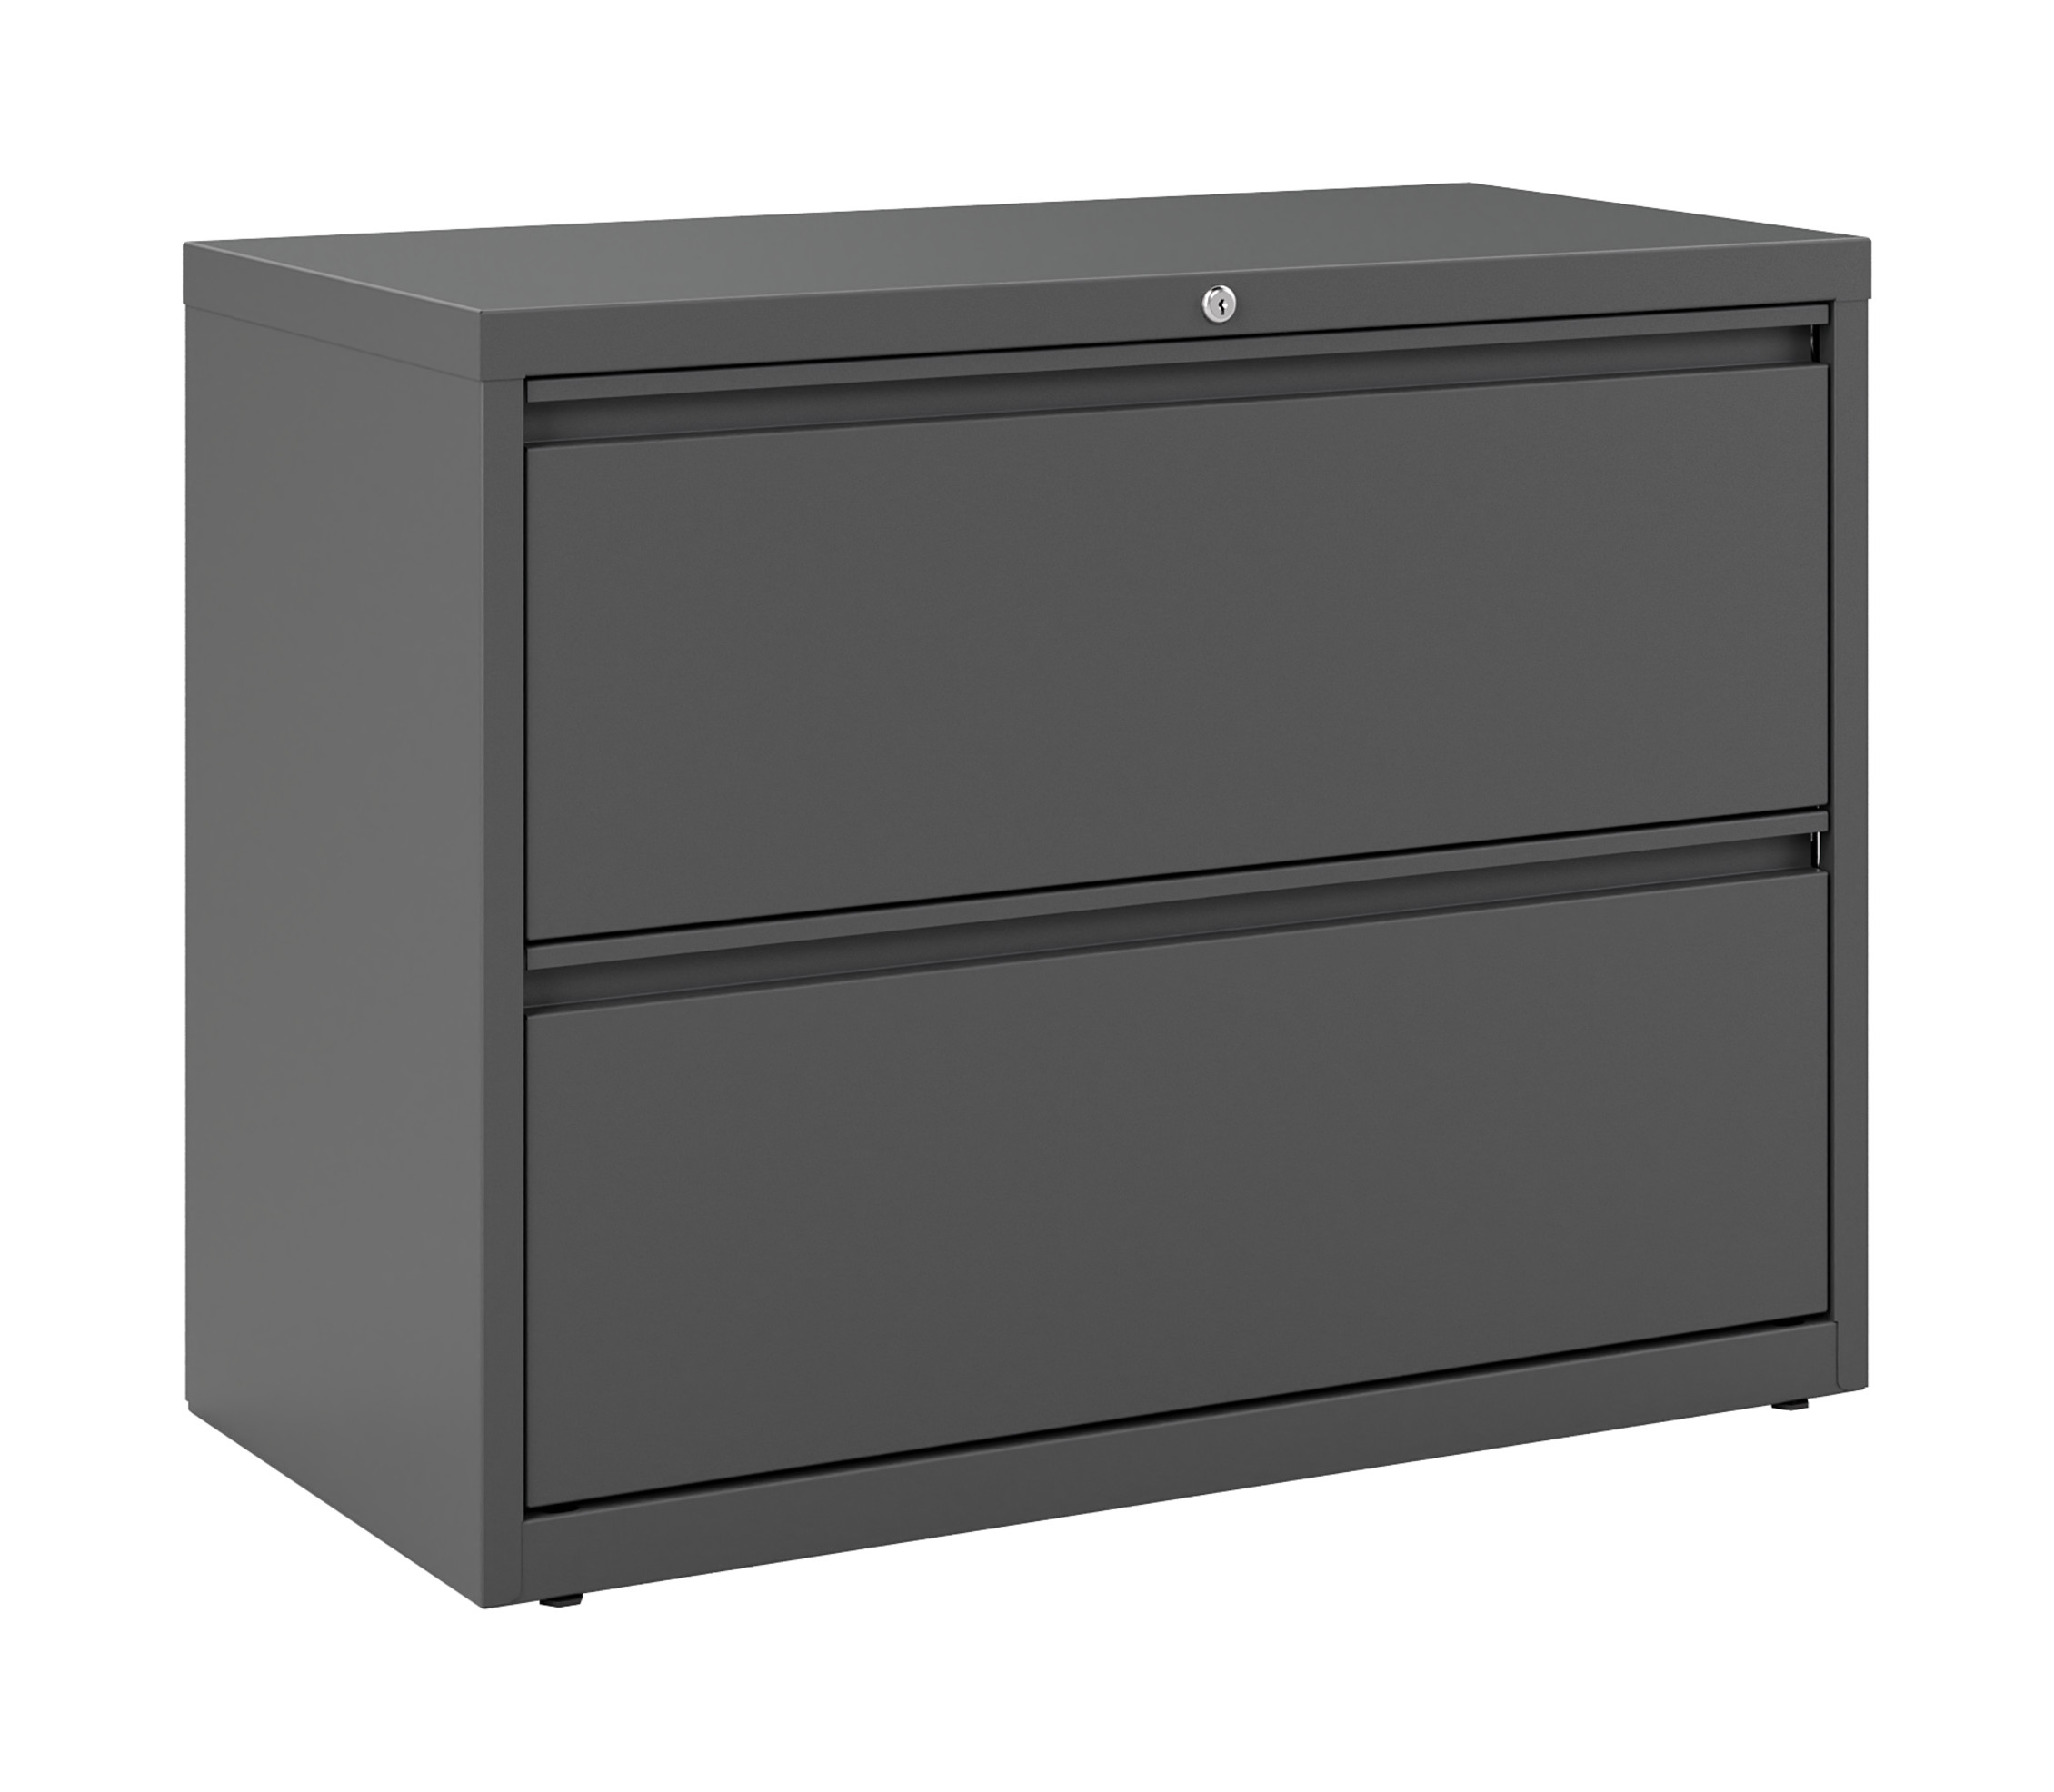 Hirsh 36 Inch Wide 2 Drawer Metal Lateral File Cabinet for Home and Office, Holds Letter, Legal and A4 Hanging Folders, Charcoal - image 1 of 6